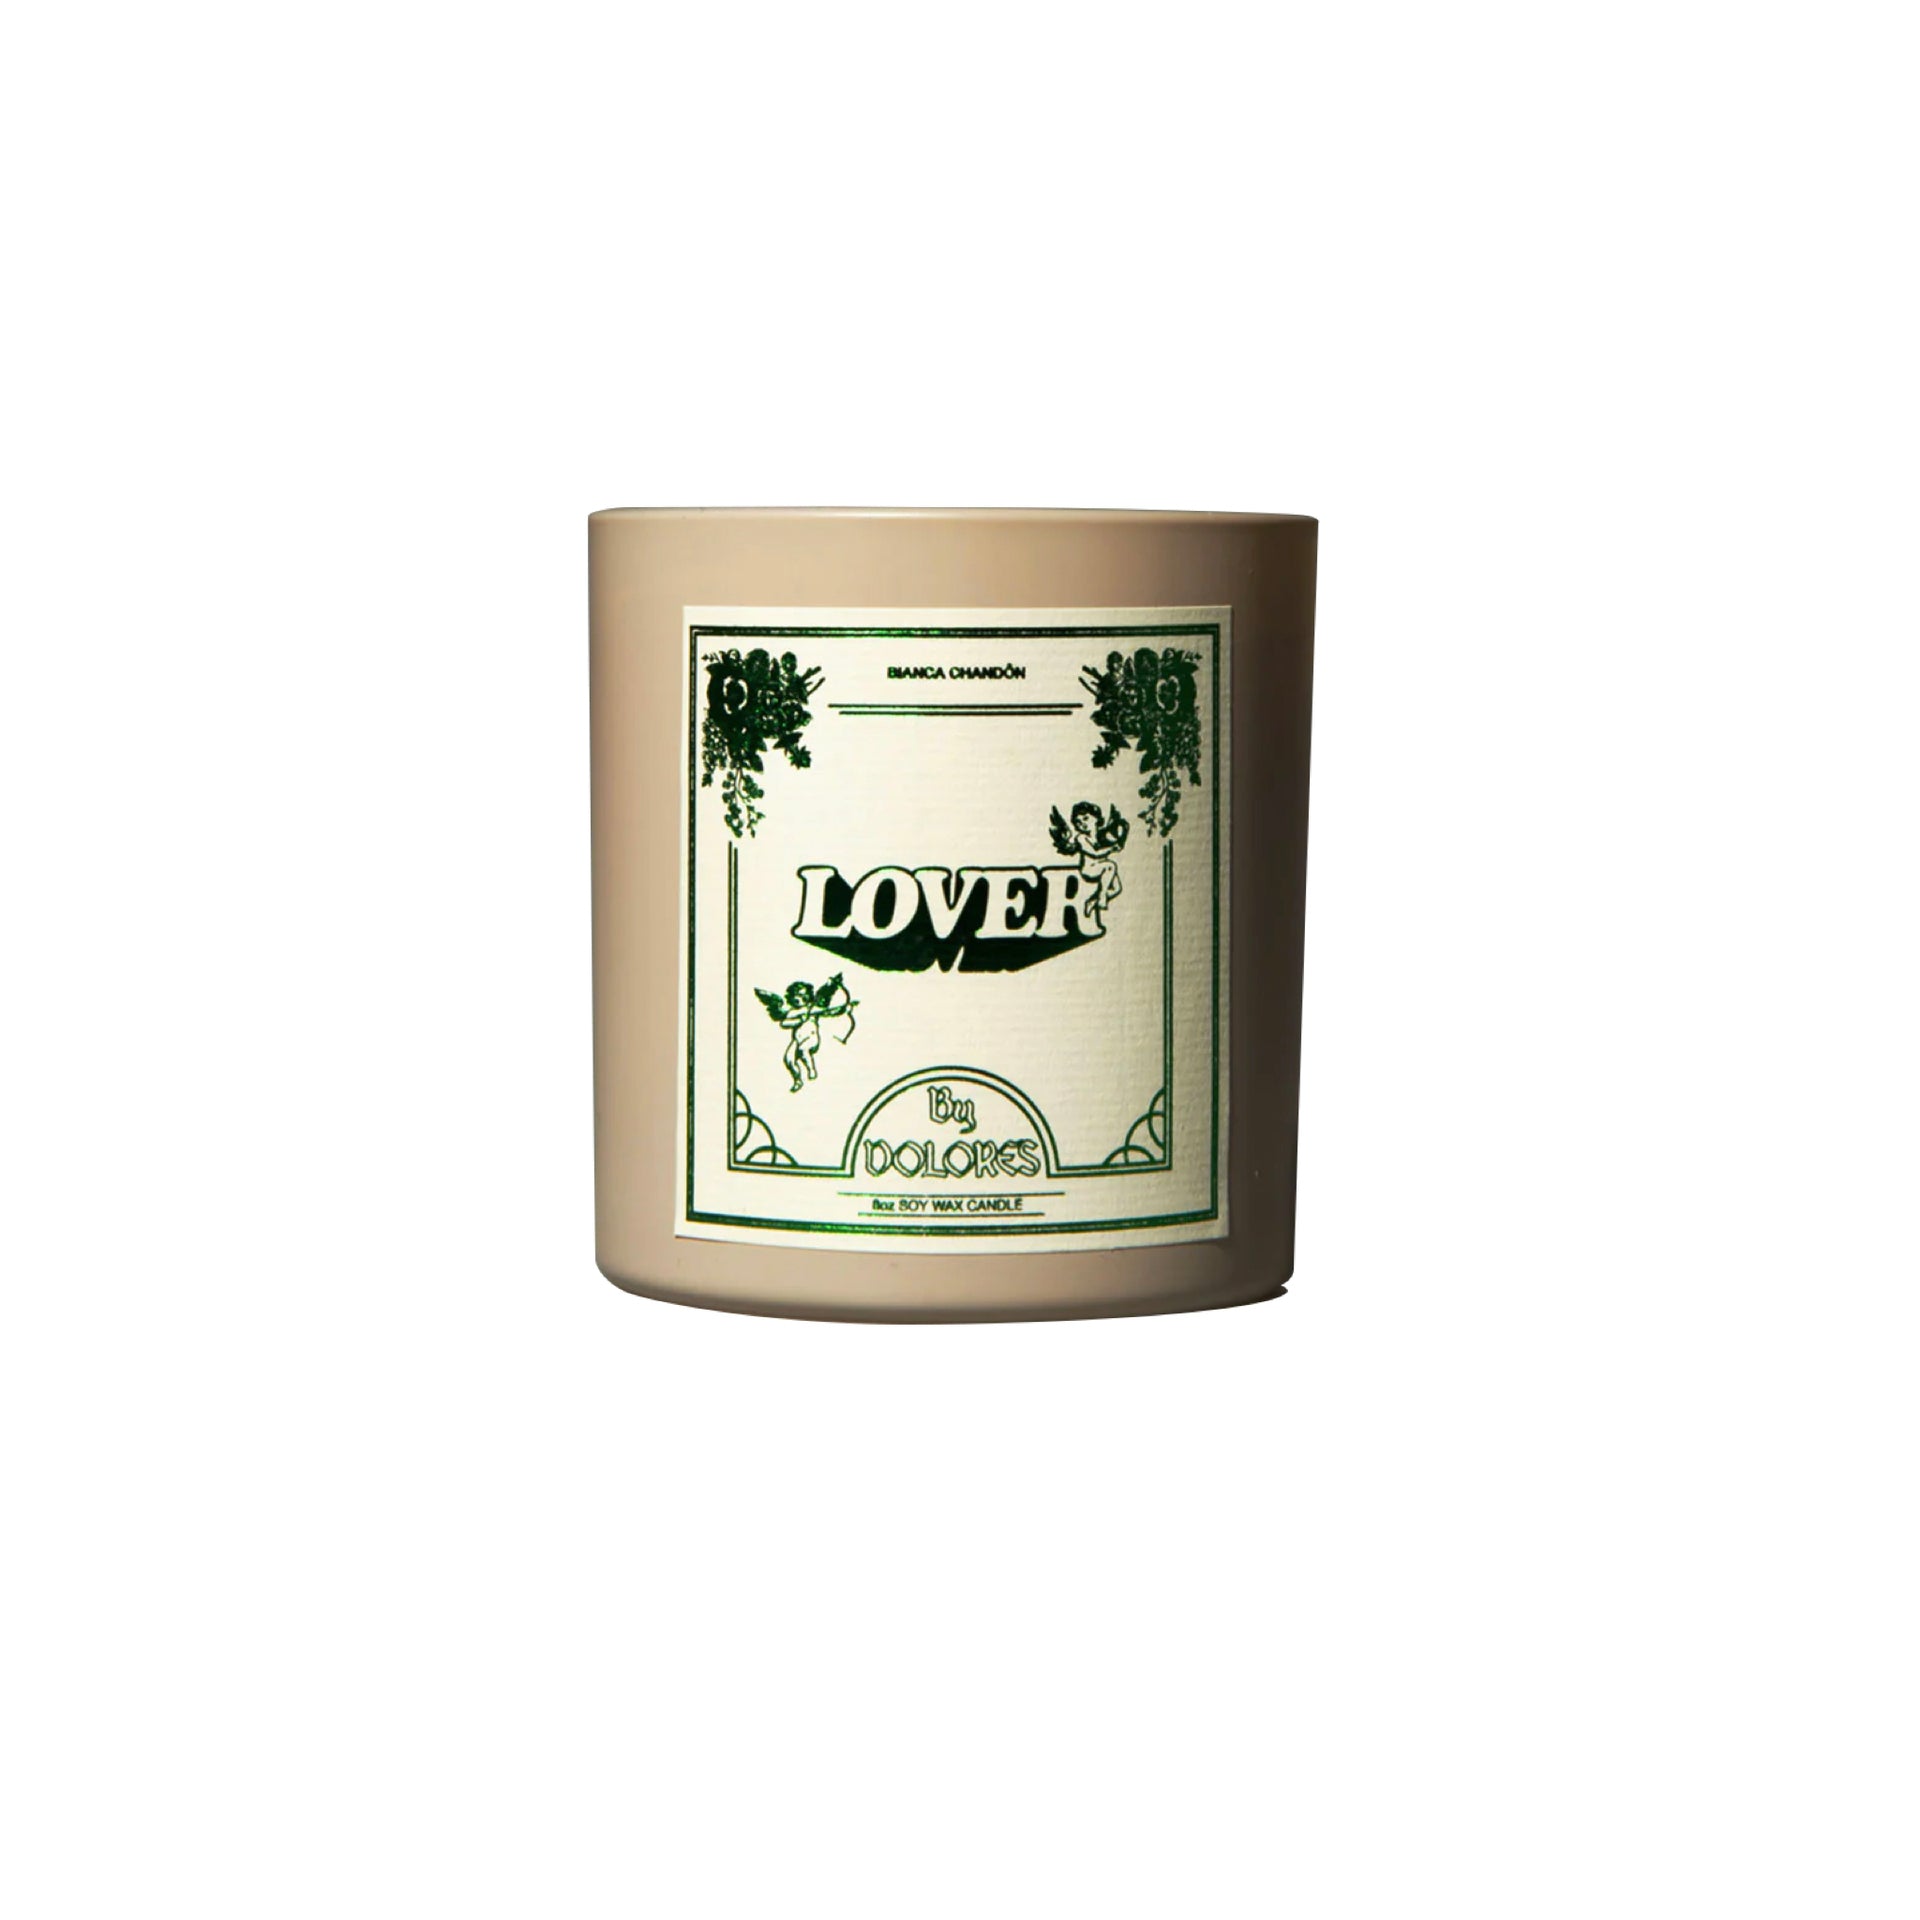 Bianca Chadon x Dolores Lover Candle